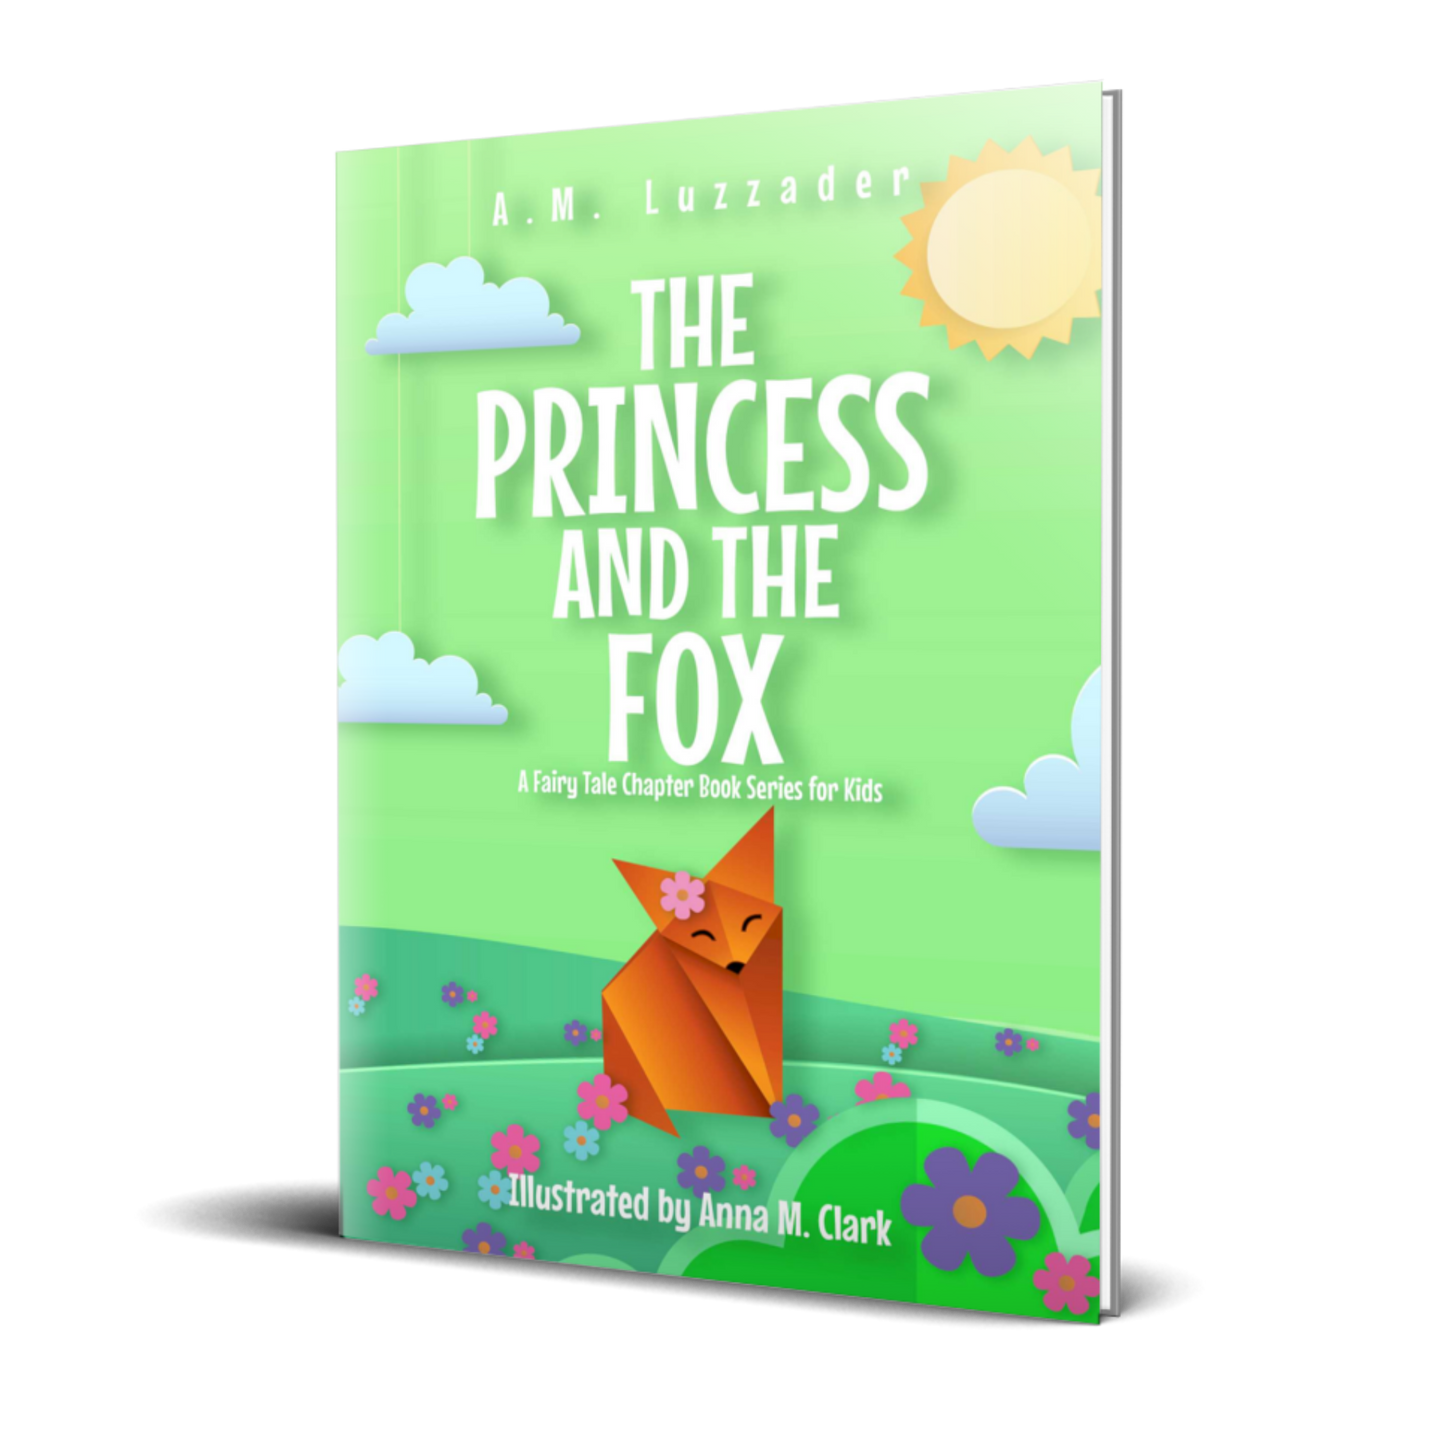 The Princess and the Fox: A Fairy Tale Chapter Book Series for Kids